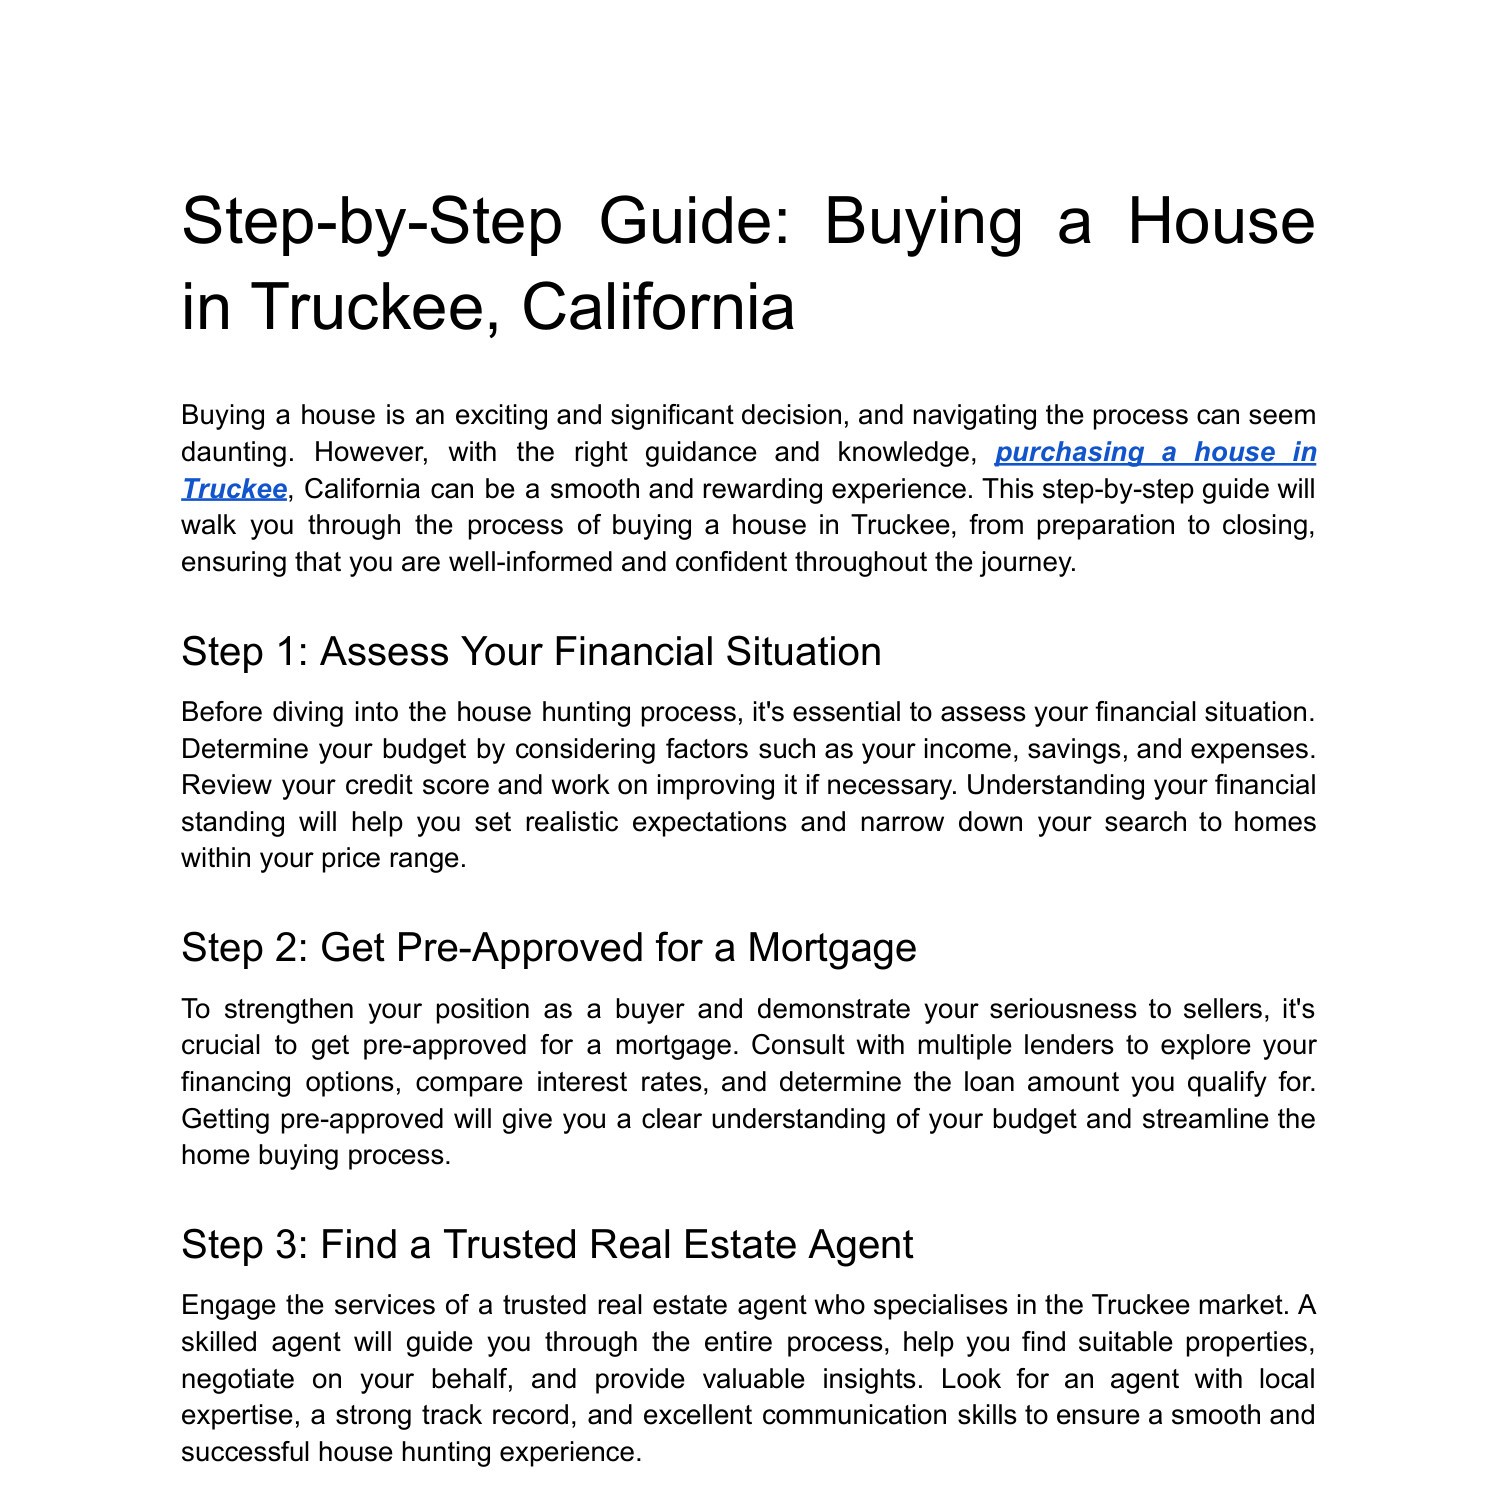 buying a home in truckee.pdf | DocDroid